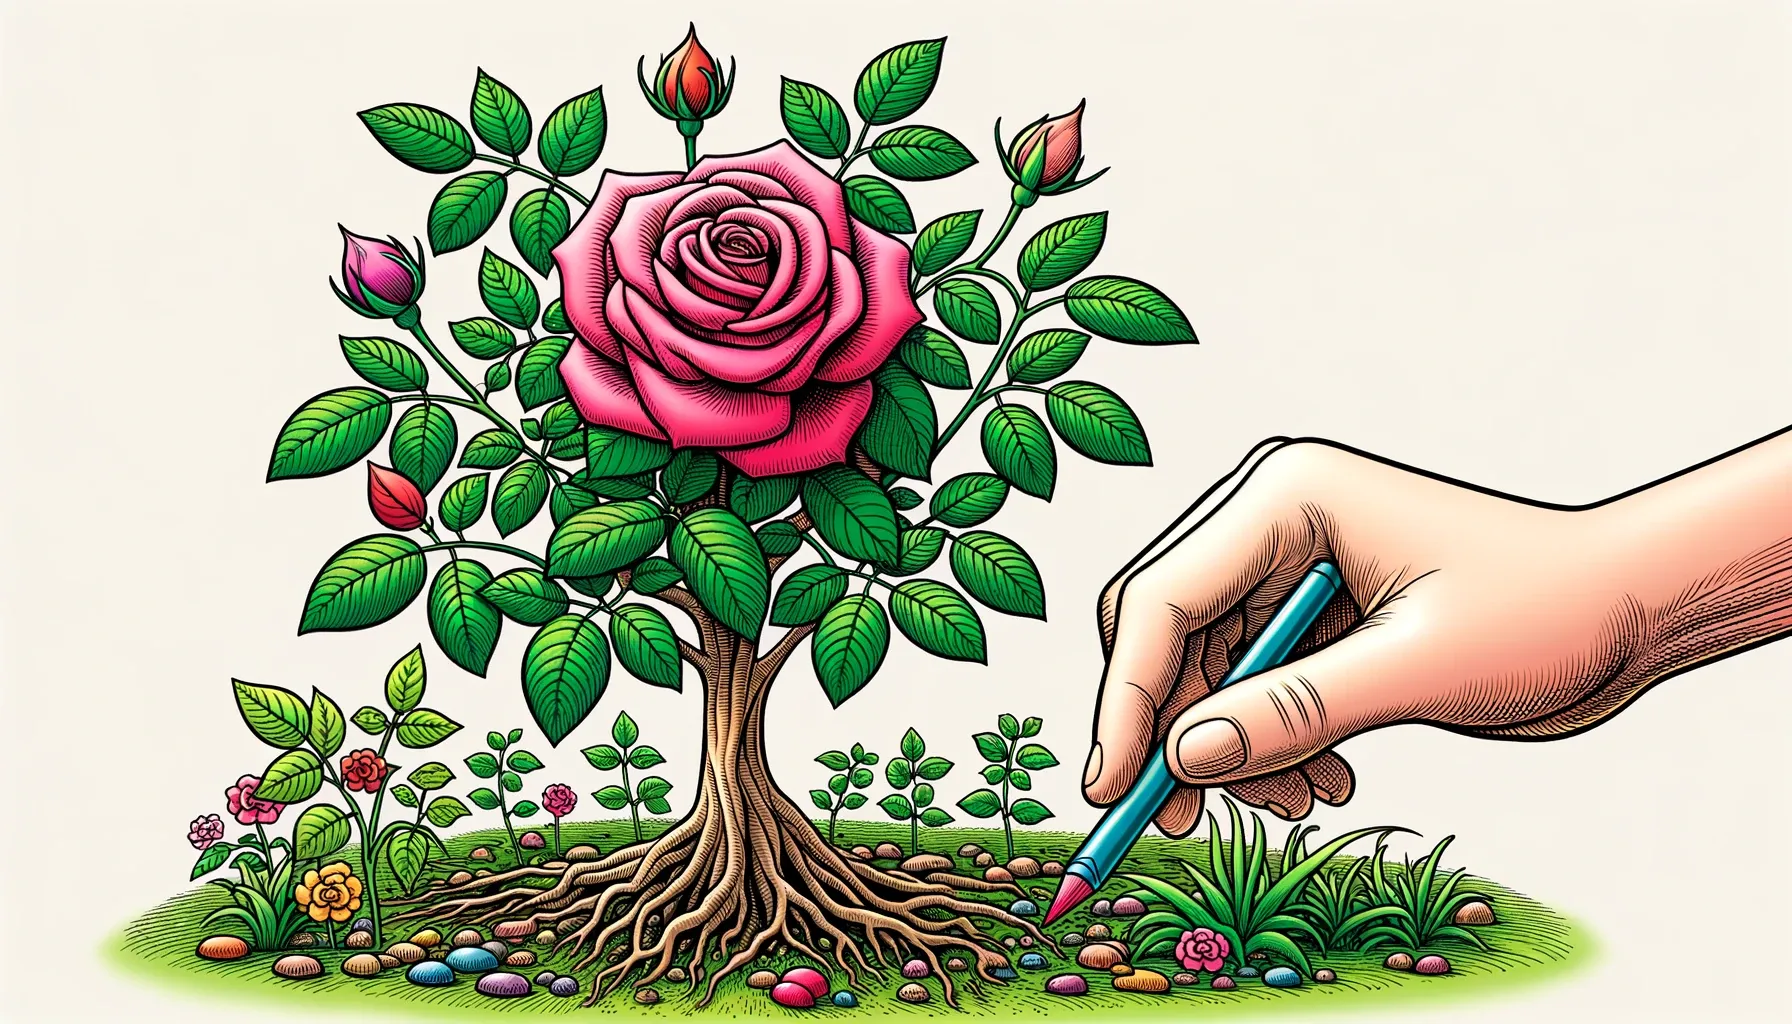 Wide illustration: A close-up view of a single rose bush in the brain garden. As a hand (representing coloring) tends to the bush, weeds around its base recede, and the rose blooms brighter, showcasing the positive impact of coloring on brain health.